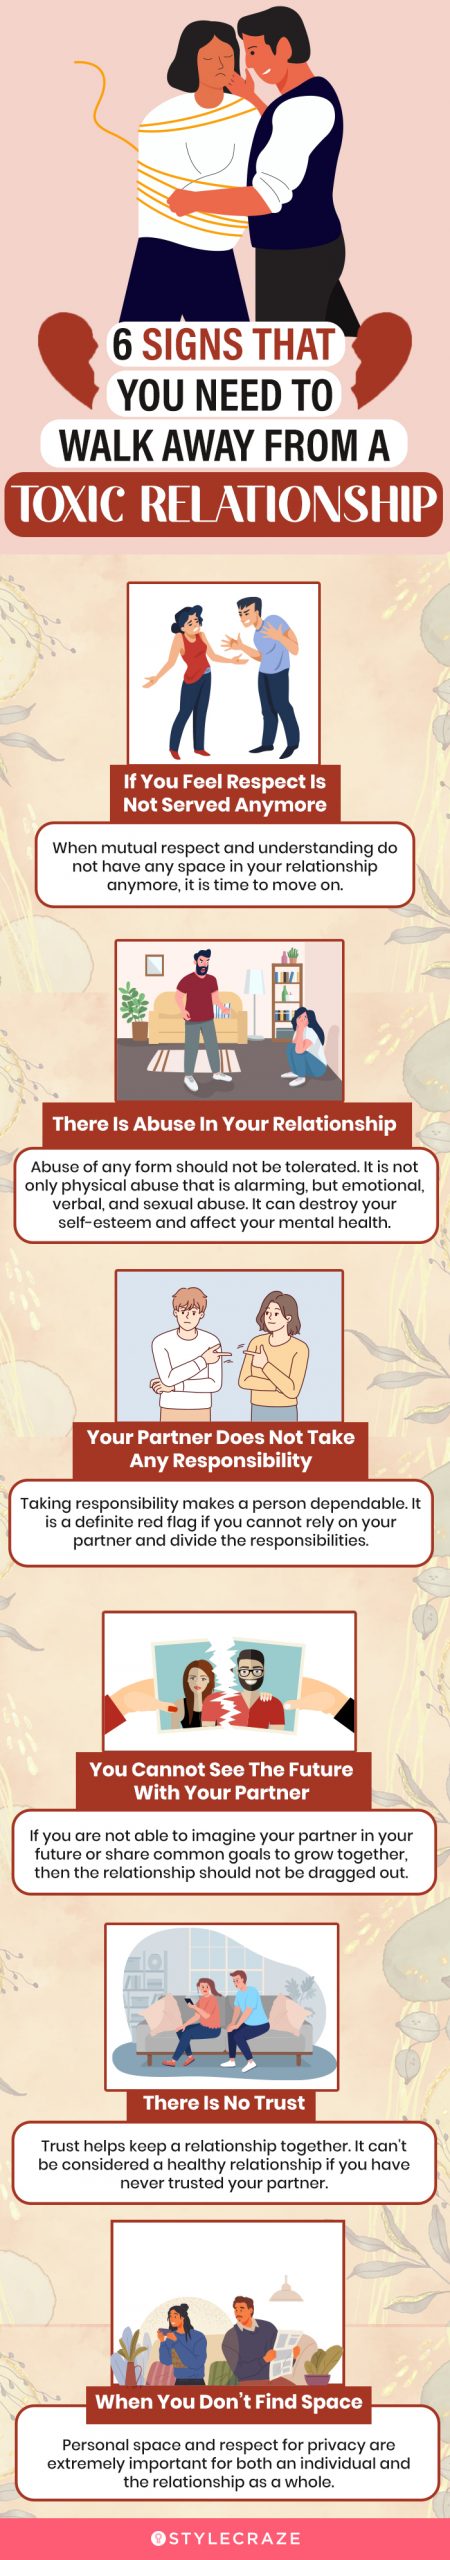 6 signs that you need to walk away from a toxic relationship (infographic)